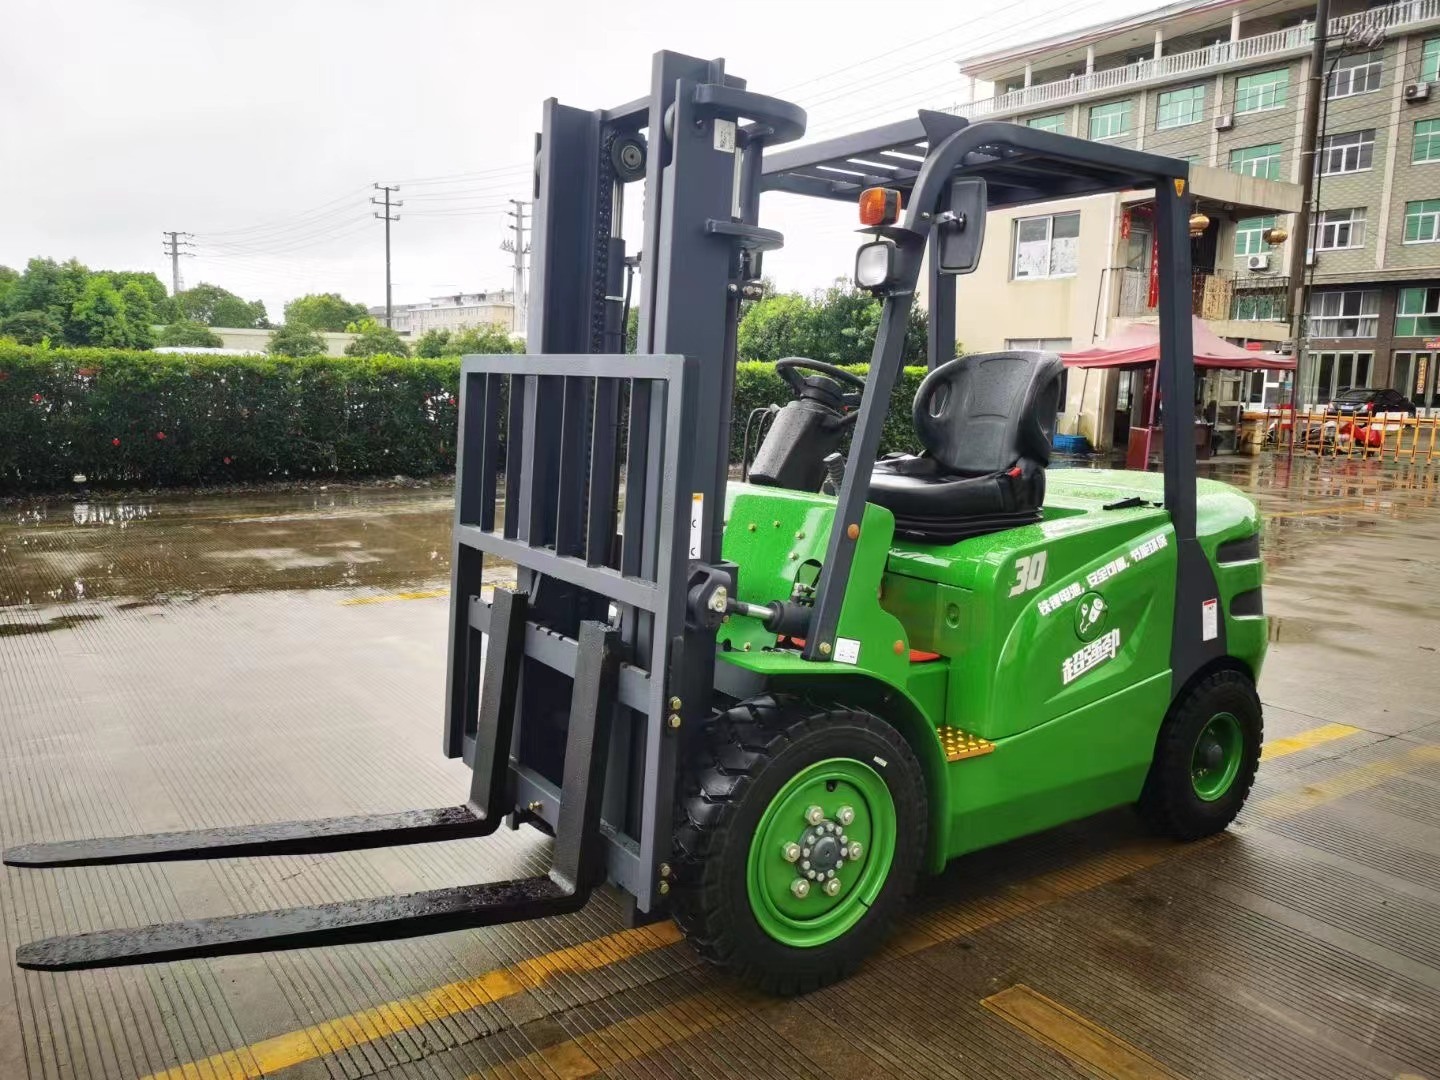 1t 2t 3 Ton Battery Diesel Electric Gasoline Forklift Price with Parts for Sale 4 5 Ton Diesel Engine Hydraulic Forklift for Sale